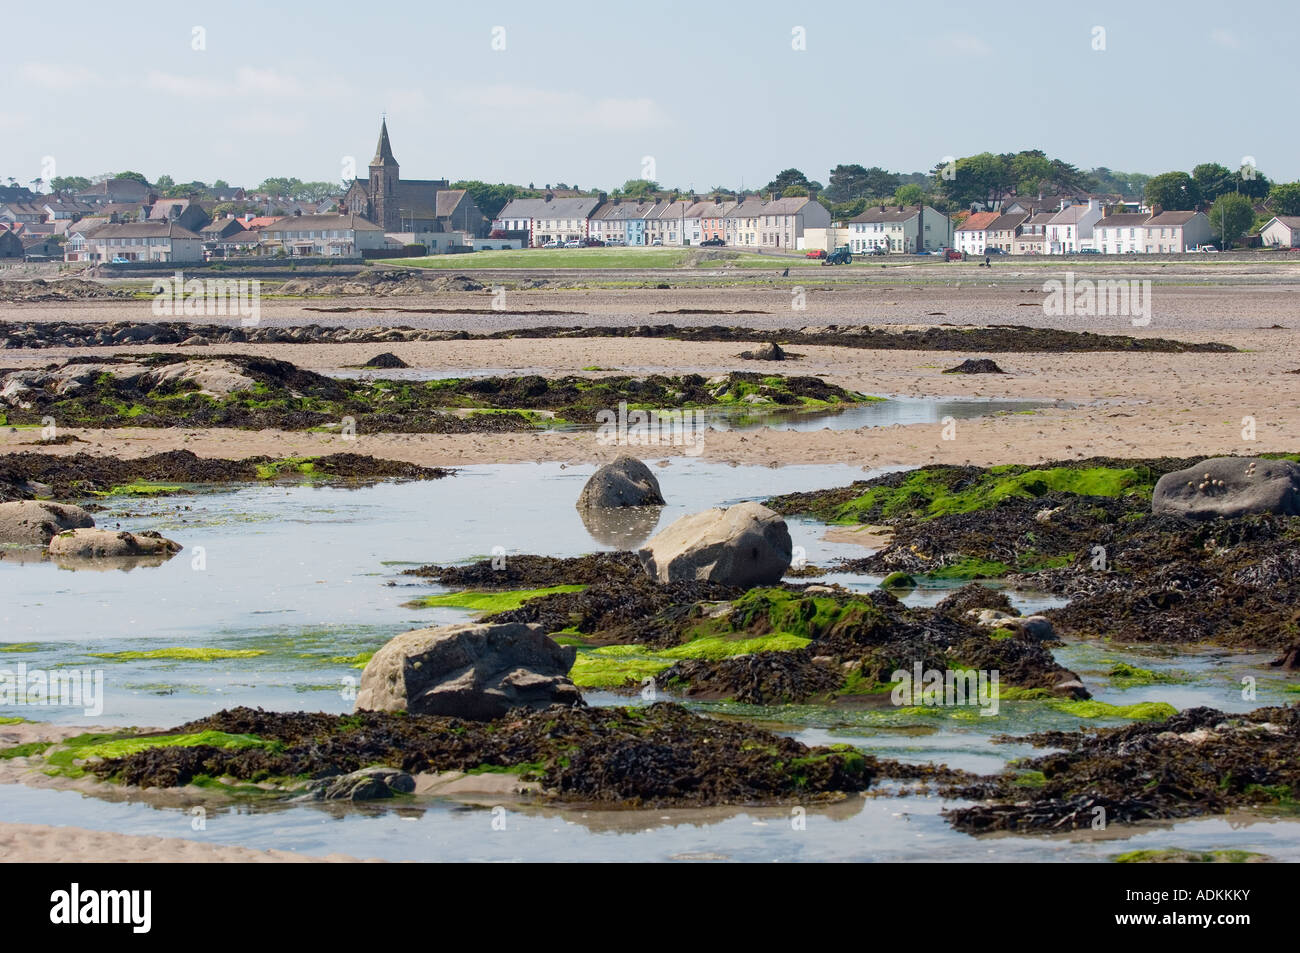 Low tide across the beach at Ballywalter village on the Irish Sea coast of the Ards peninsula, County Down, Northern Ireland. Stock Photo